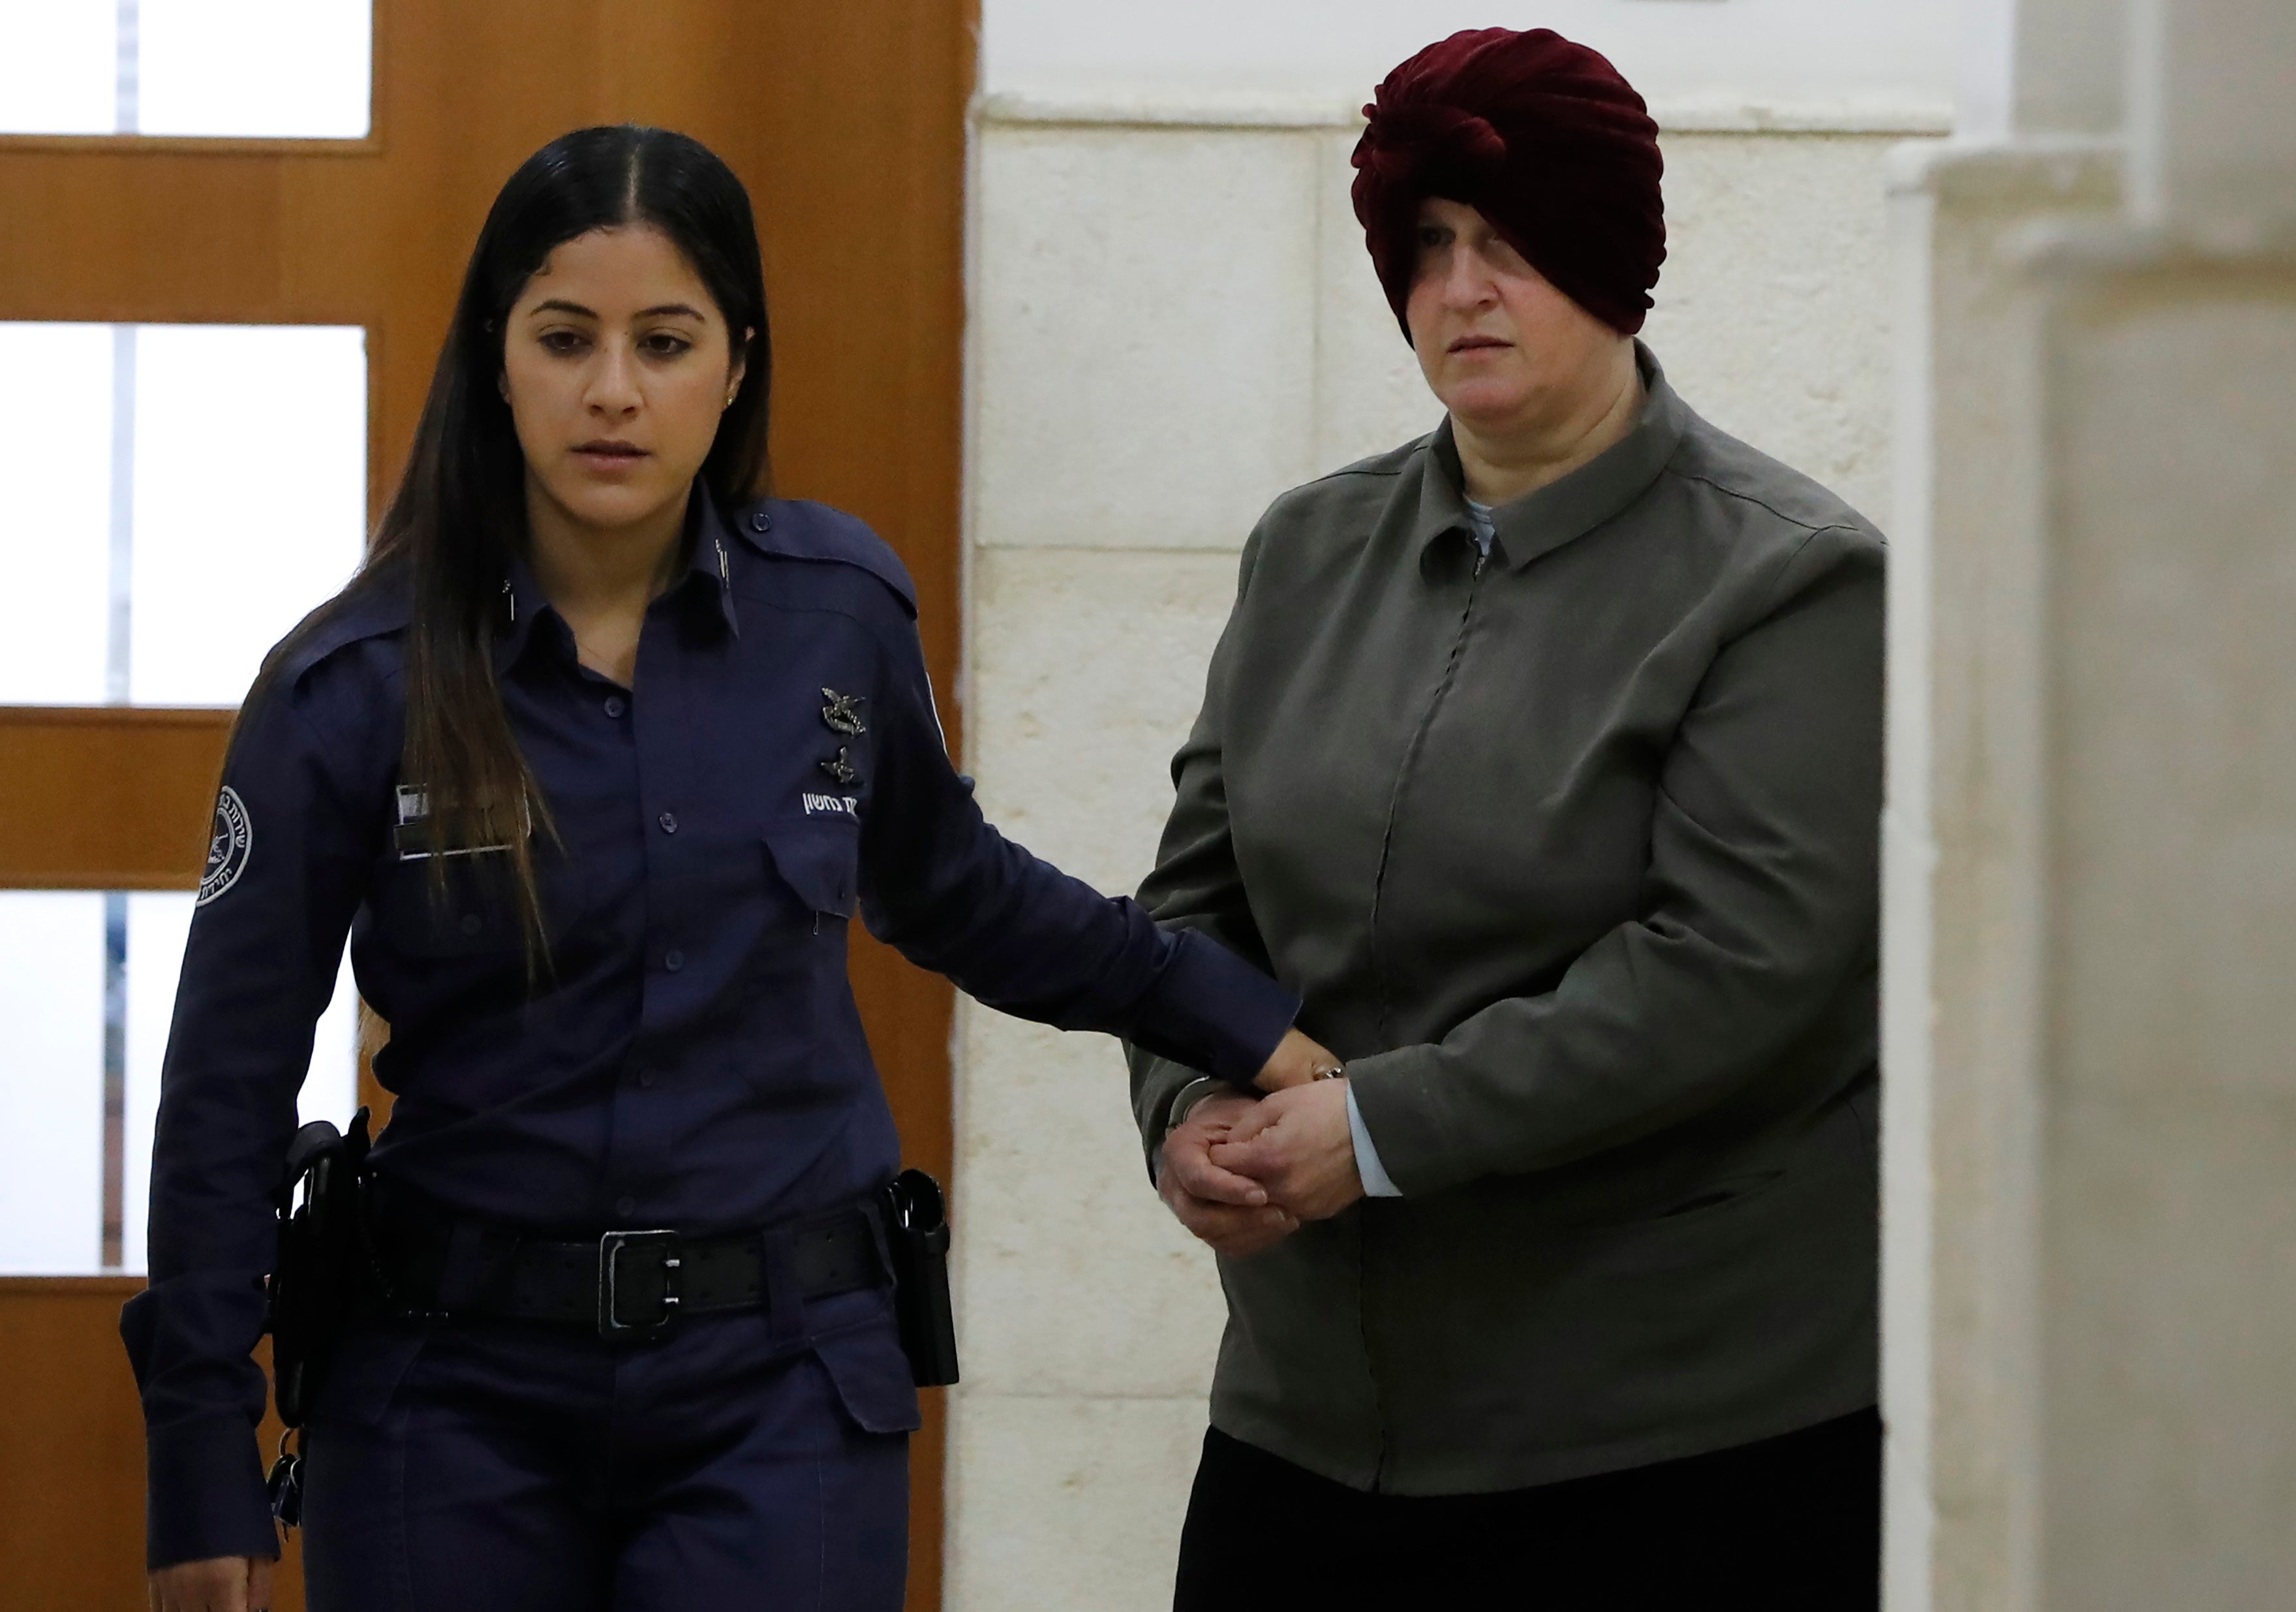 In this file photo taken on 27 February 2018, Malka Leifer, a former Australian teacher accused of sexual abuse of girls at a school, arrives for a hearing at the District Court in Jerusalem